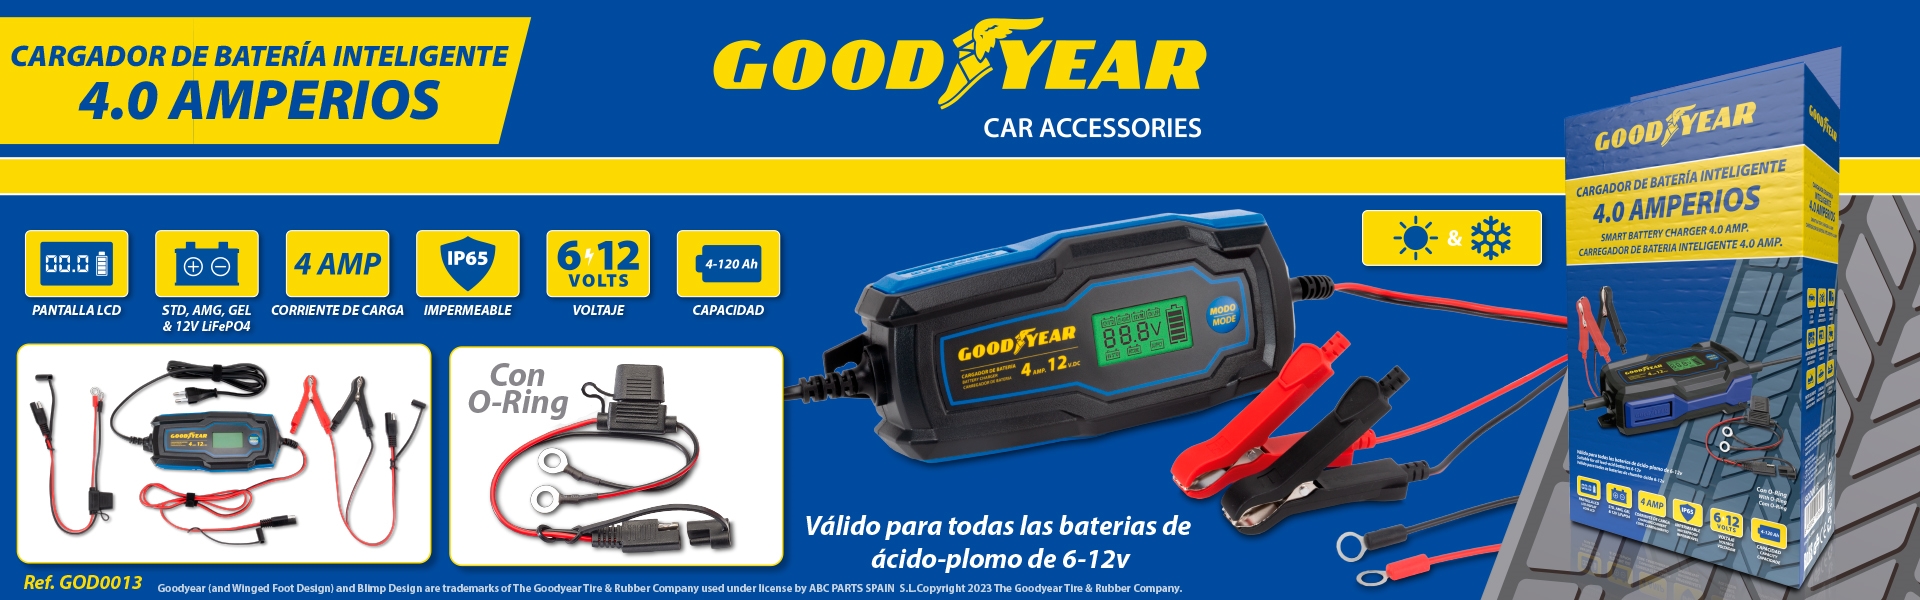 SMART BATTERY CHARGER 4.0 AMP.  GOODYEAR